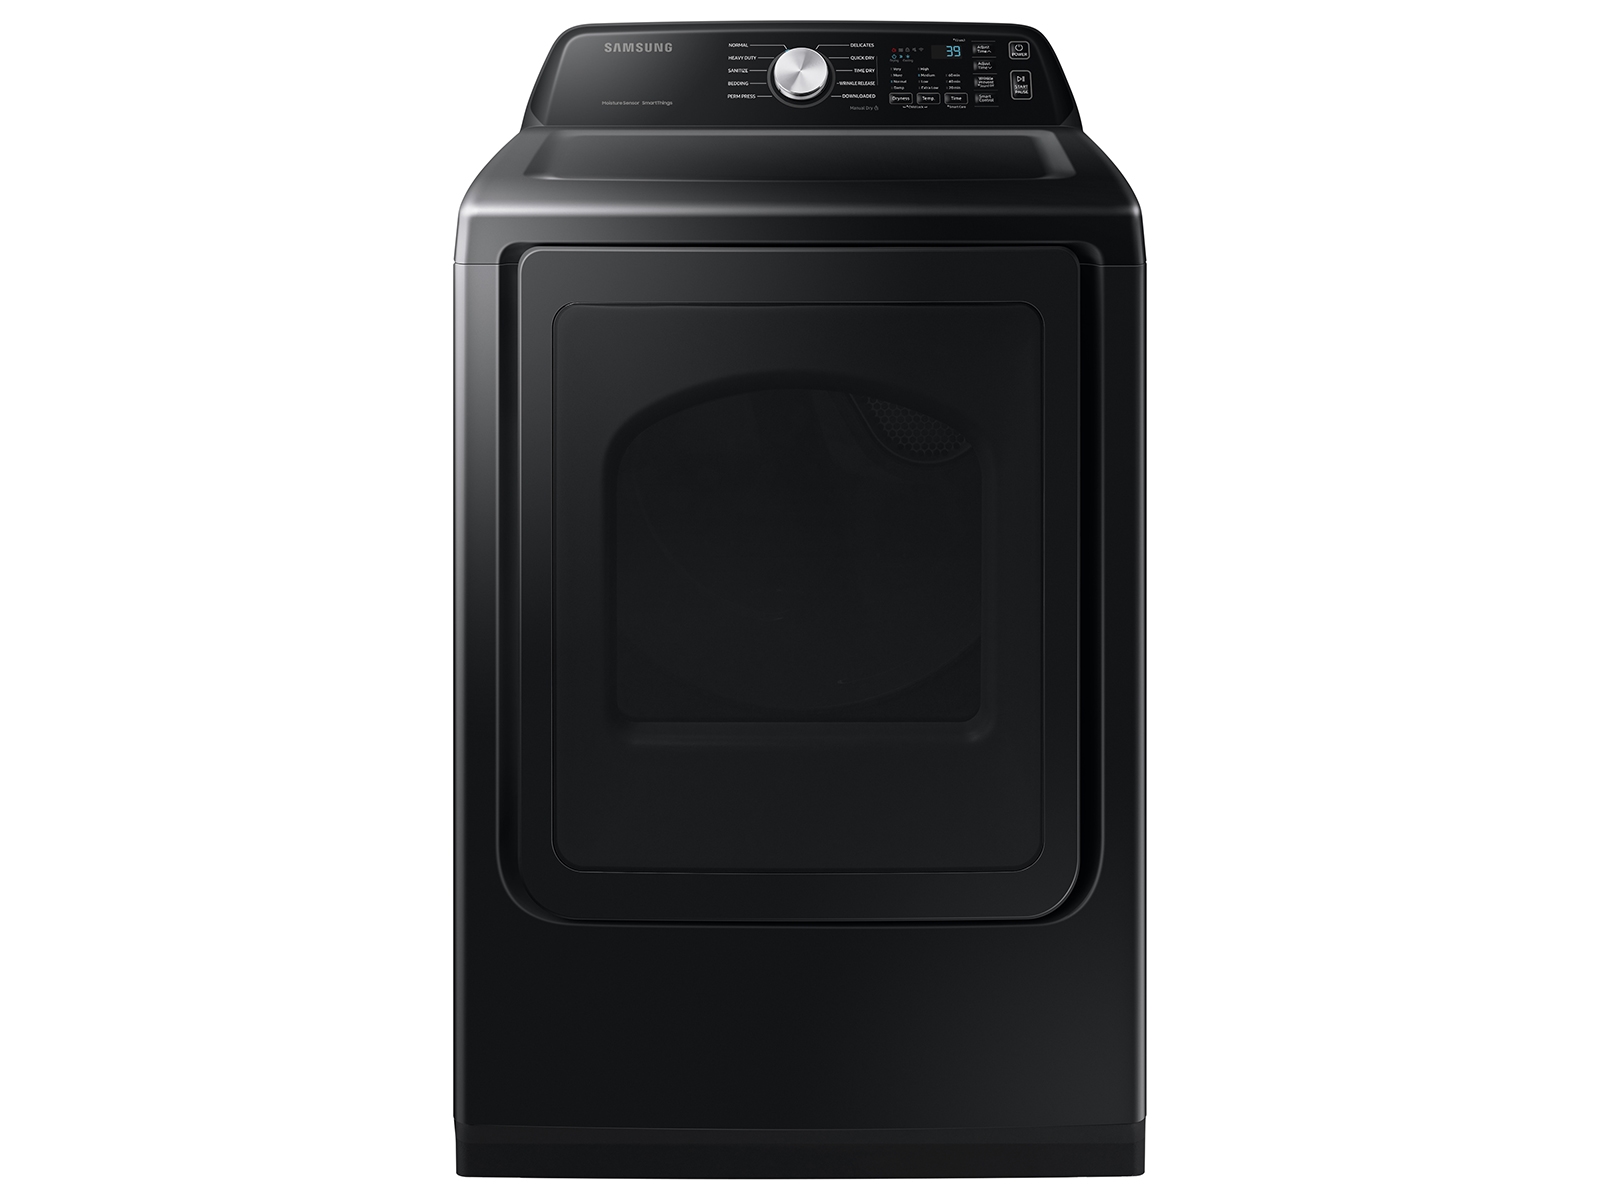 Photos - Tumble Dryer Samsung 7.4 cu. ft. Smart Electric Dryer with Sensor Dry in Brushed Black( 